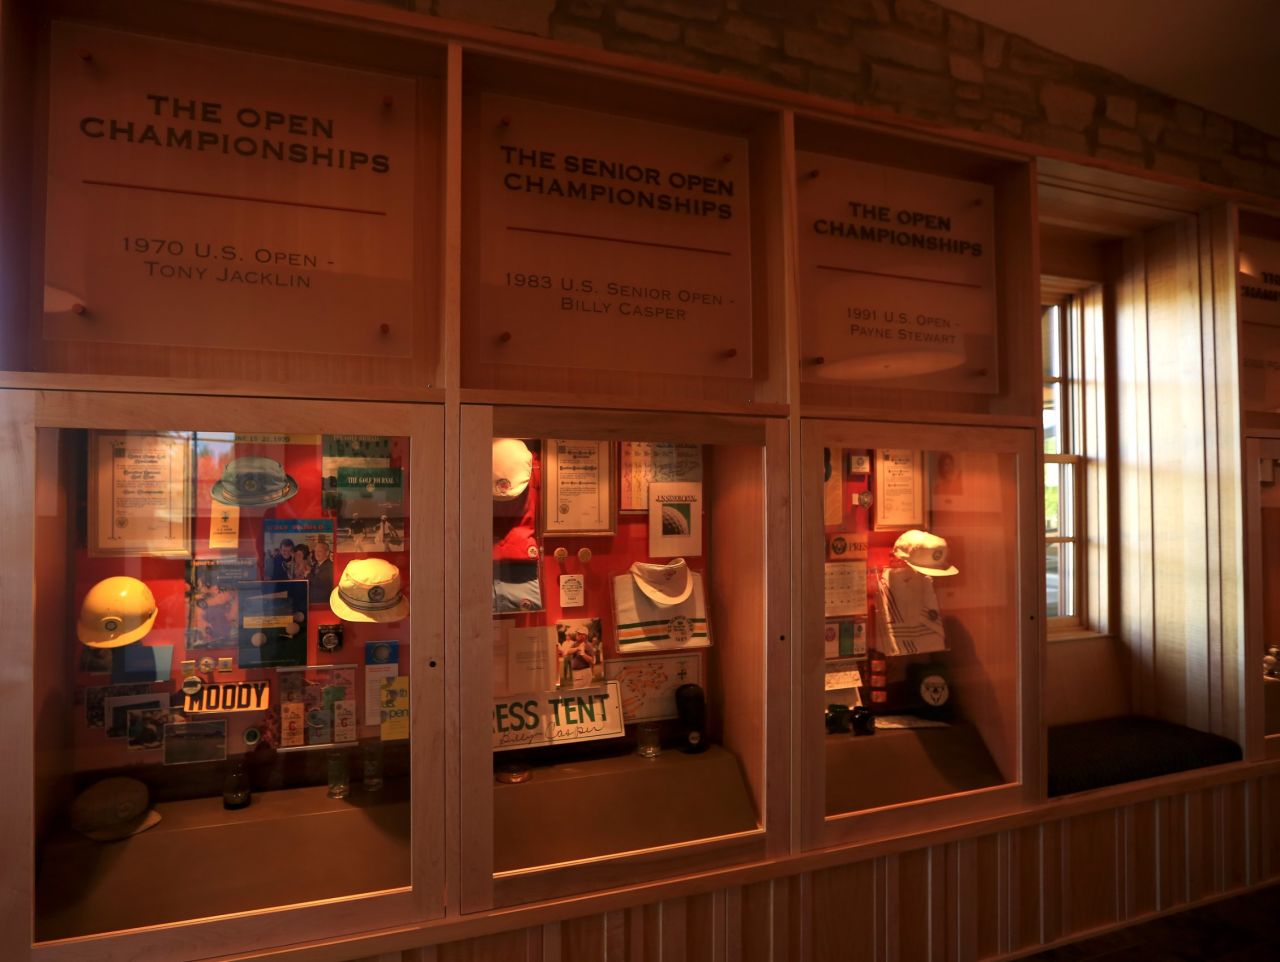 It includes a display of memorabilia from the 1970 and 1991 US  Opens and the 1983 US Senior Open, won by Billy Casper.